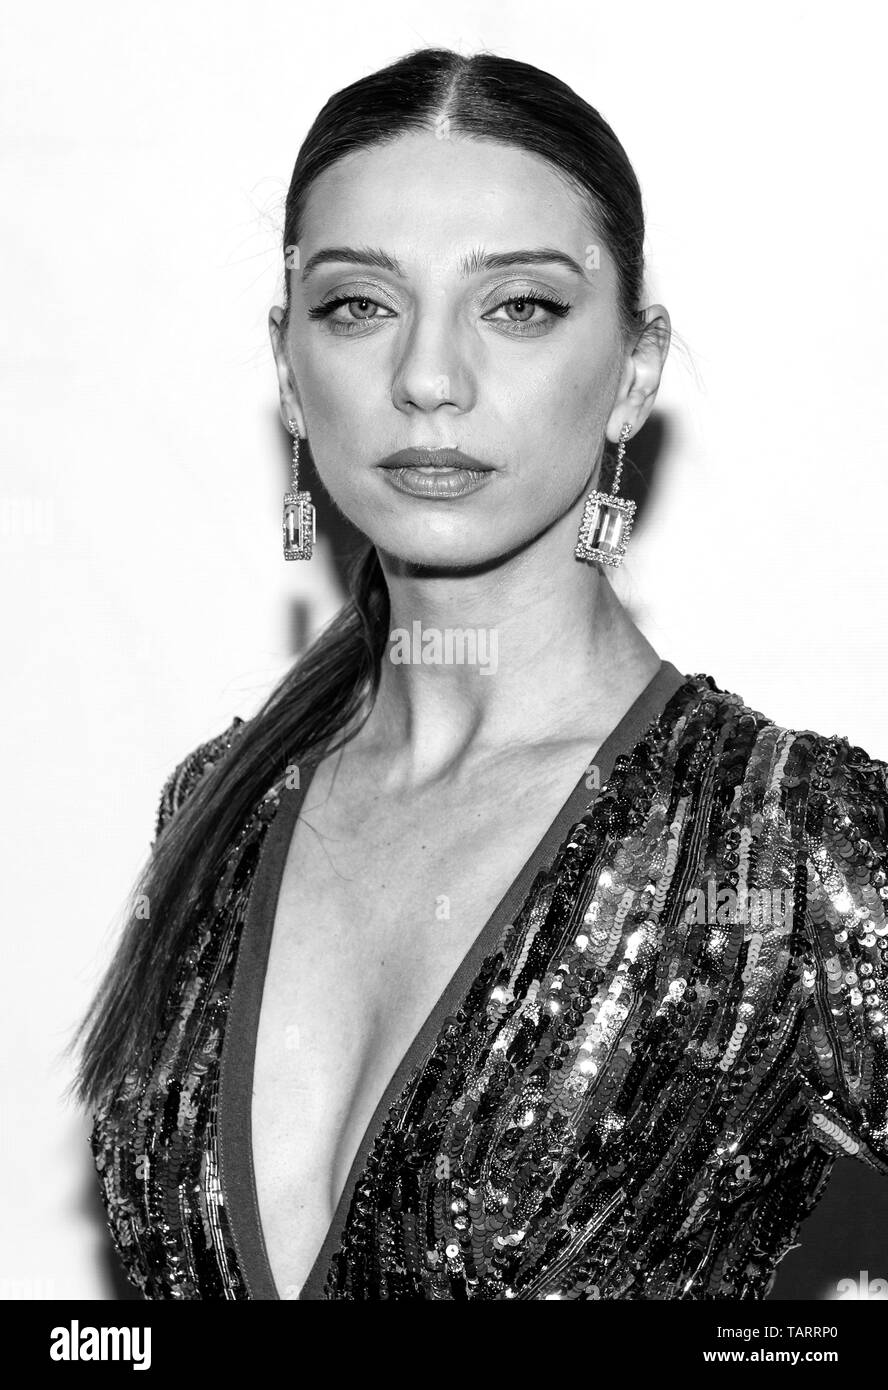 New York, NY - May 02, 2019: Angela Sarafyan wearing dress by Elie Saab attends premiere of Extremely Wicked, Shockingly Evil and Vile movie during Tr Stock Photo